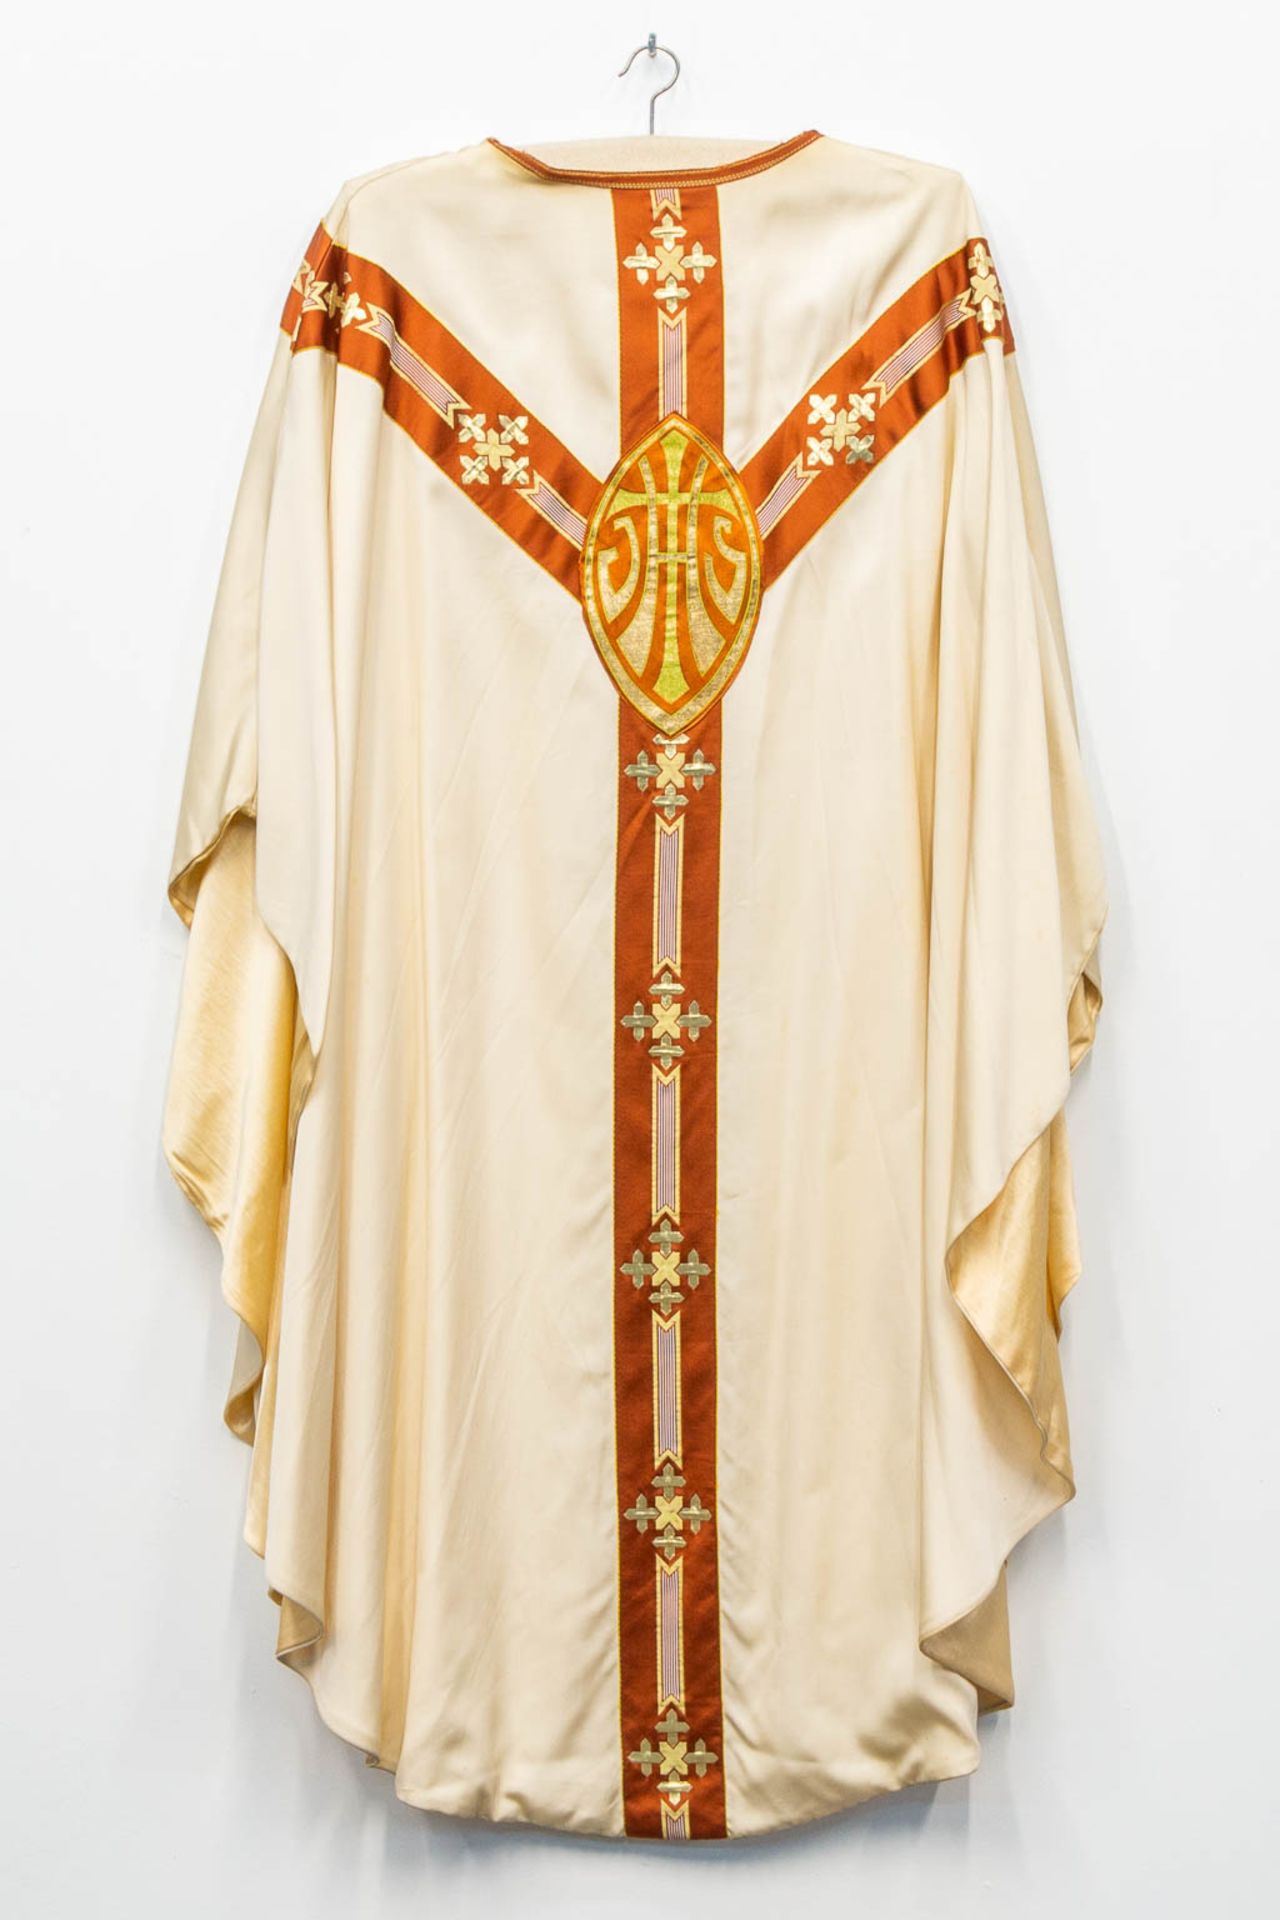 A collection of 4 vintage chasubles, 20th C. - Image 6 of 12